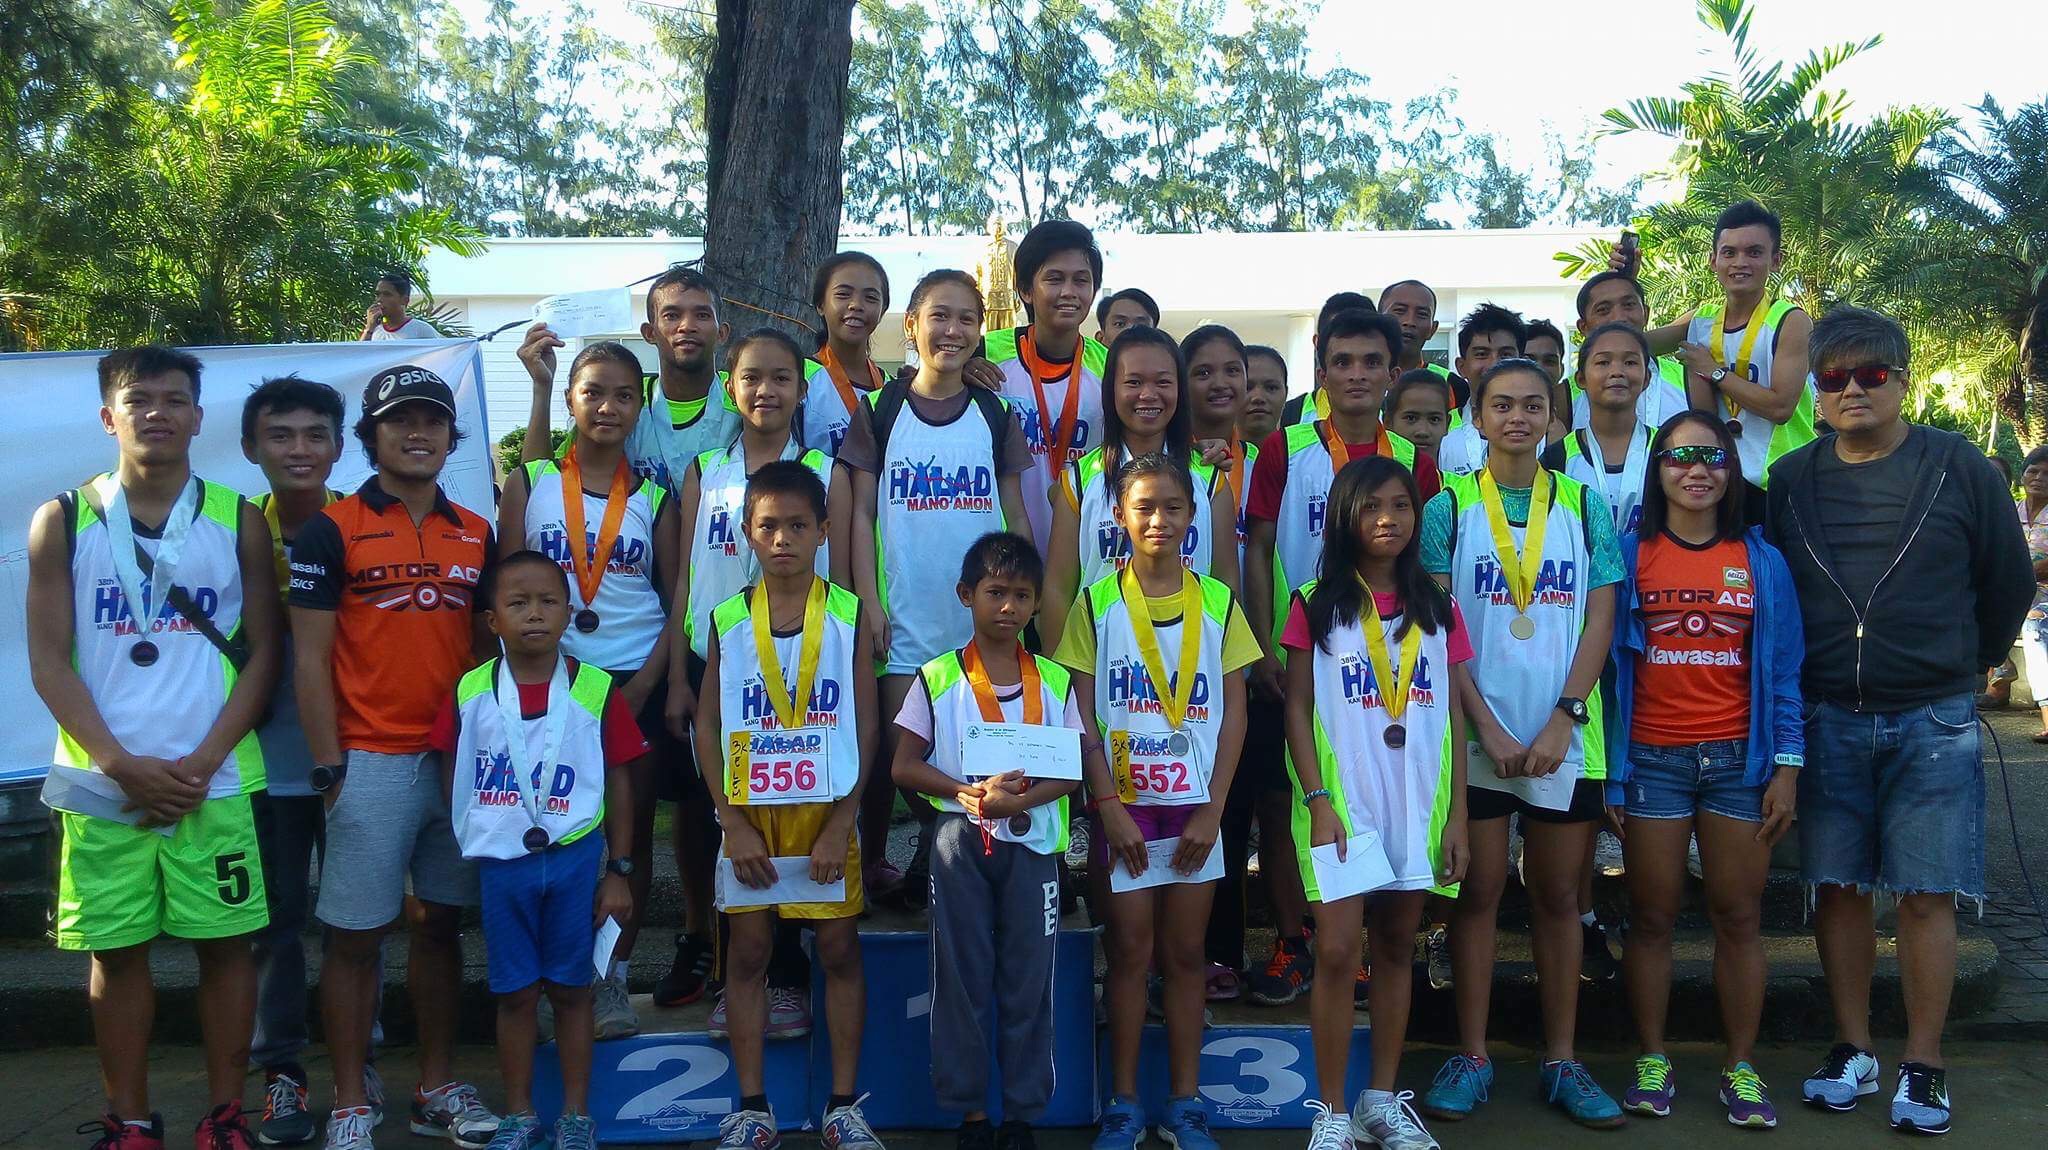 Winning runners of the Halad Kang Mano Amon Run during the awarding ceremonies. Joining them are Danao City Sports Commission chairman Oscar Boying Rodriguez (right most) along with Cebuana Olympian Mary Joy Tabal (2nd from right) and her trainer John Philip Dueñas (3rd from left). (CDN PHOTO/GLENDALE G. ROSAL)